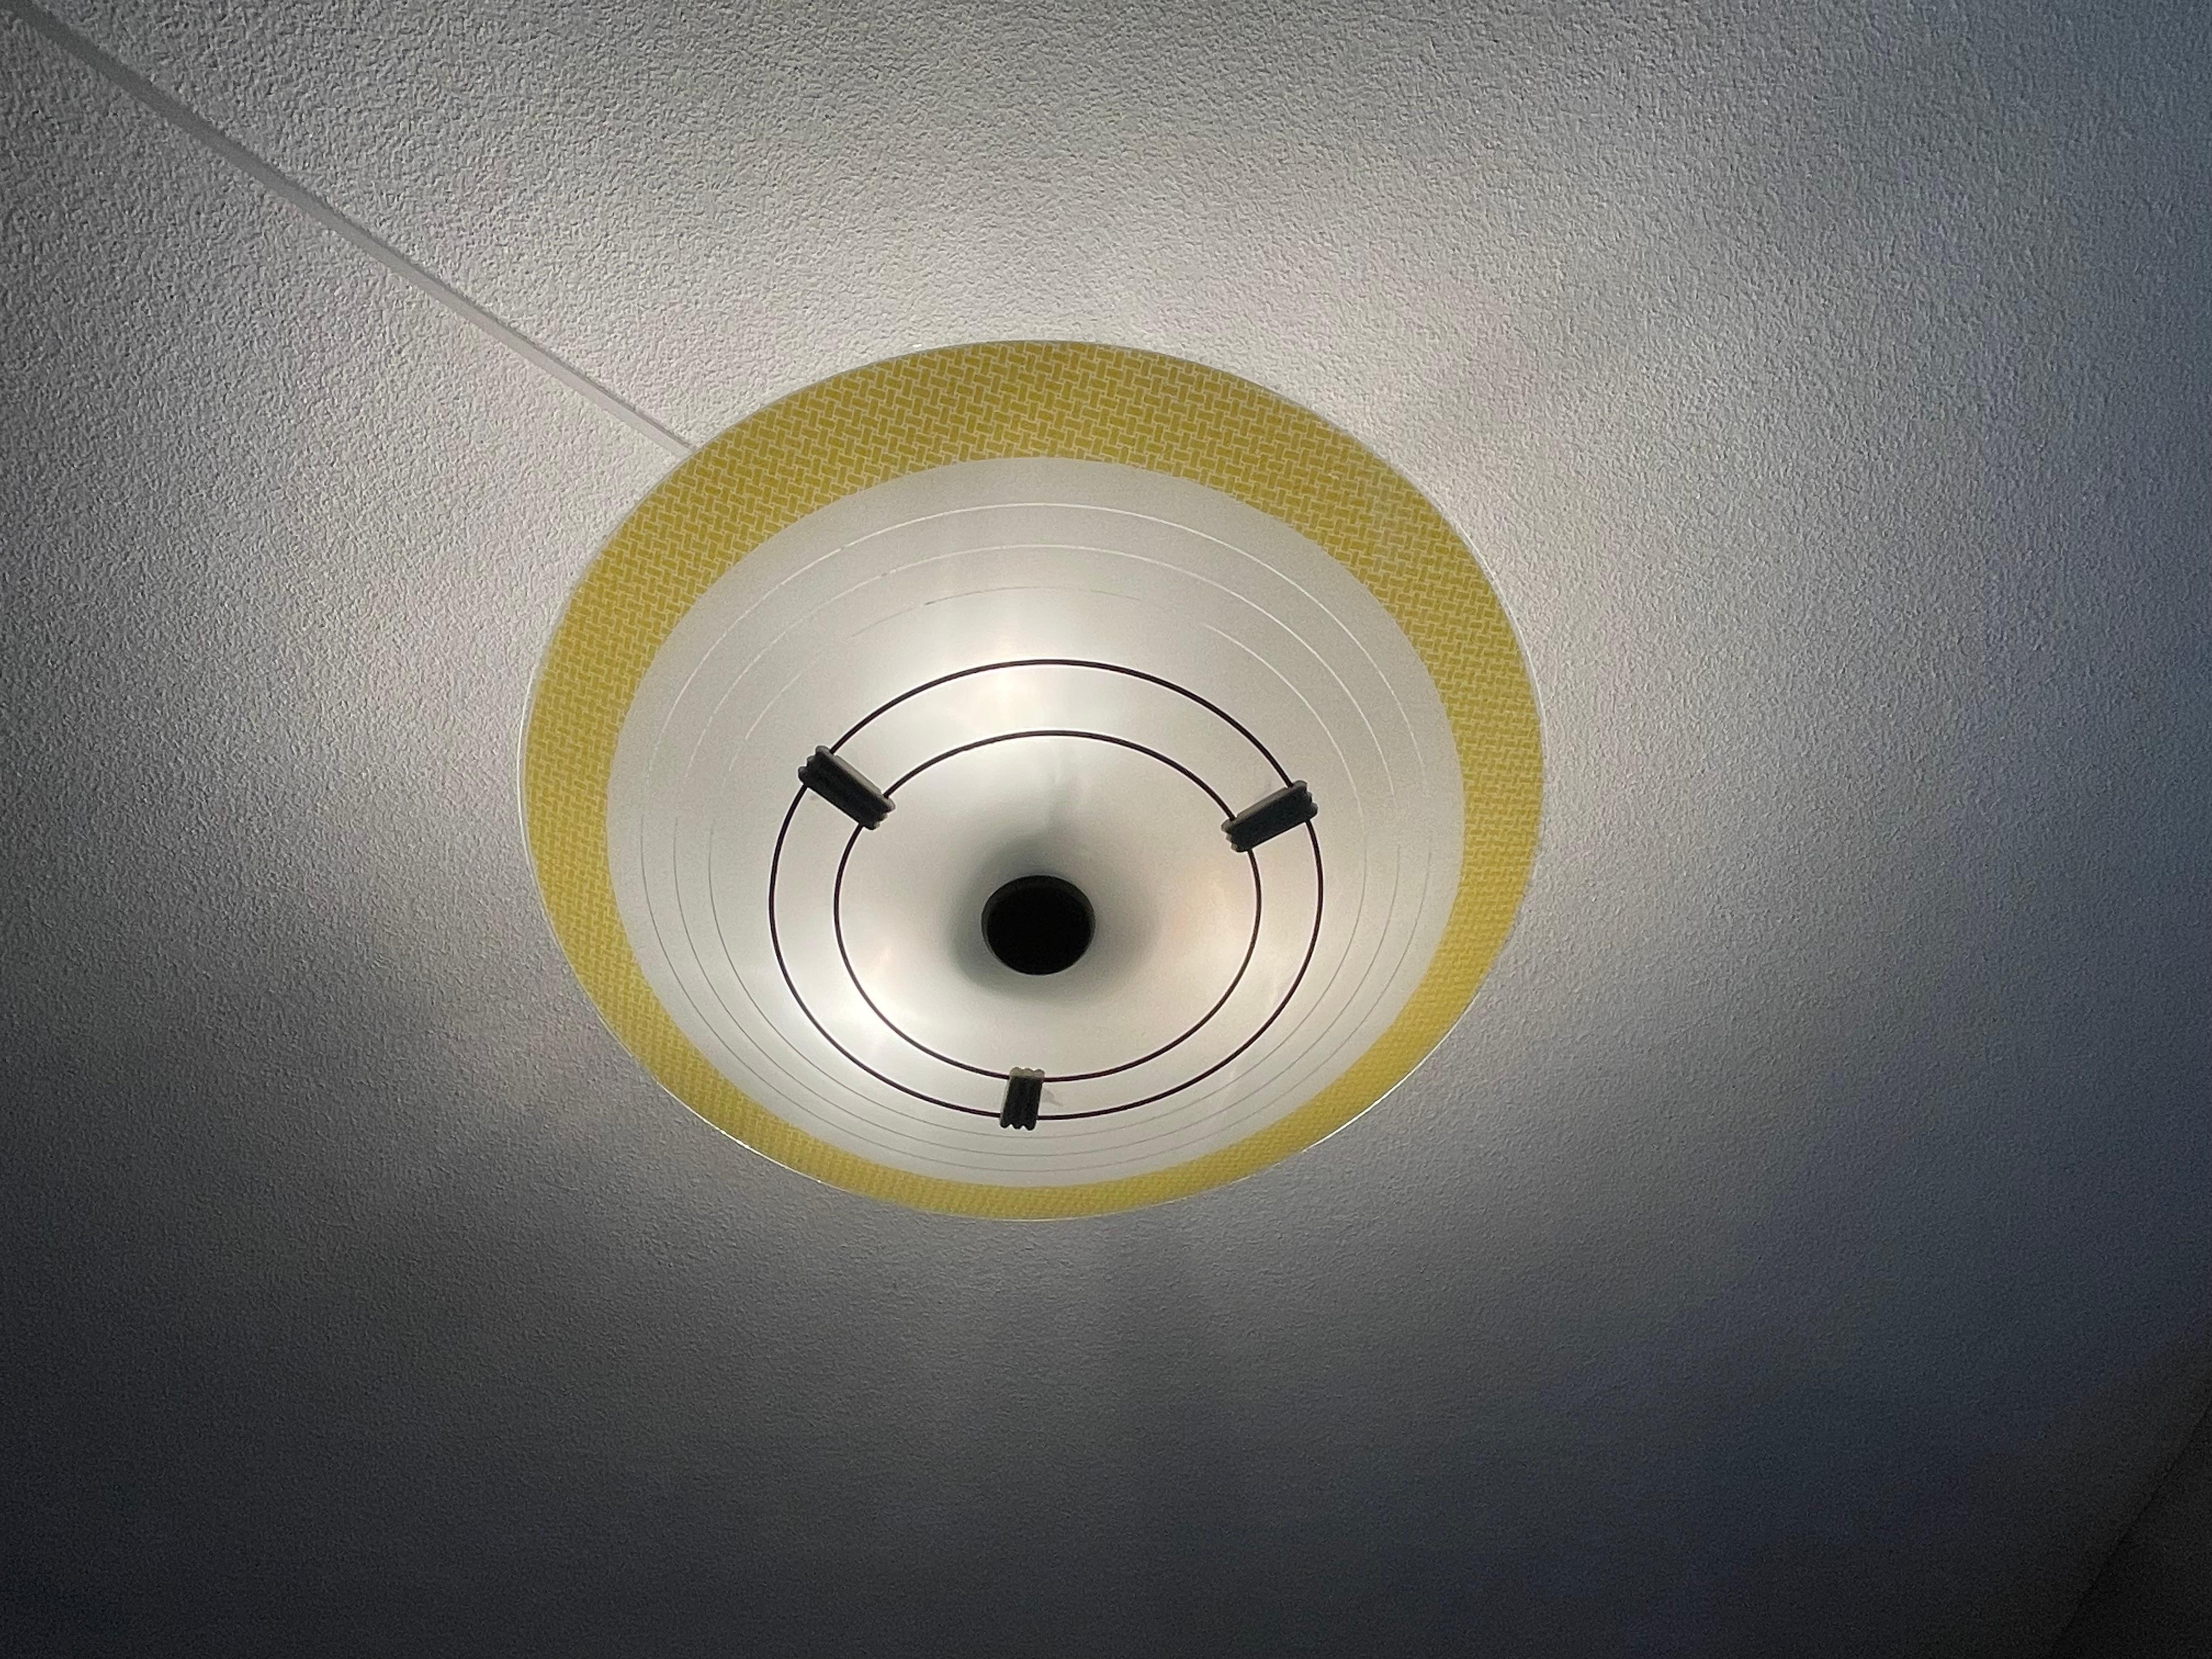 Very stylish Mid-Century Modern, yellow, white and black circular design ceiling lamp.

This vintage light fixture has a beautiful look and feel and you will hardly ever find a light fixture from the Mid-Century Modern era with a more timeless glass